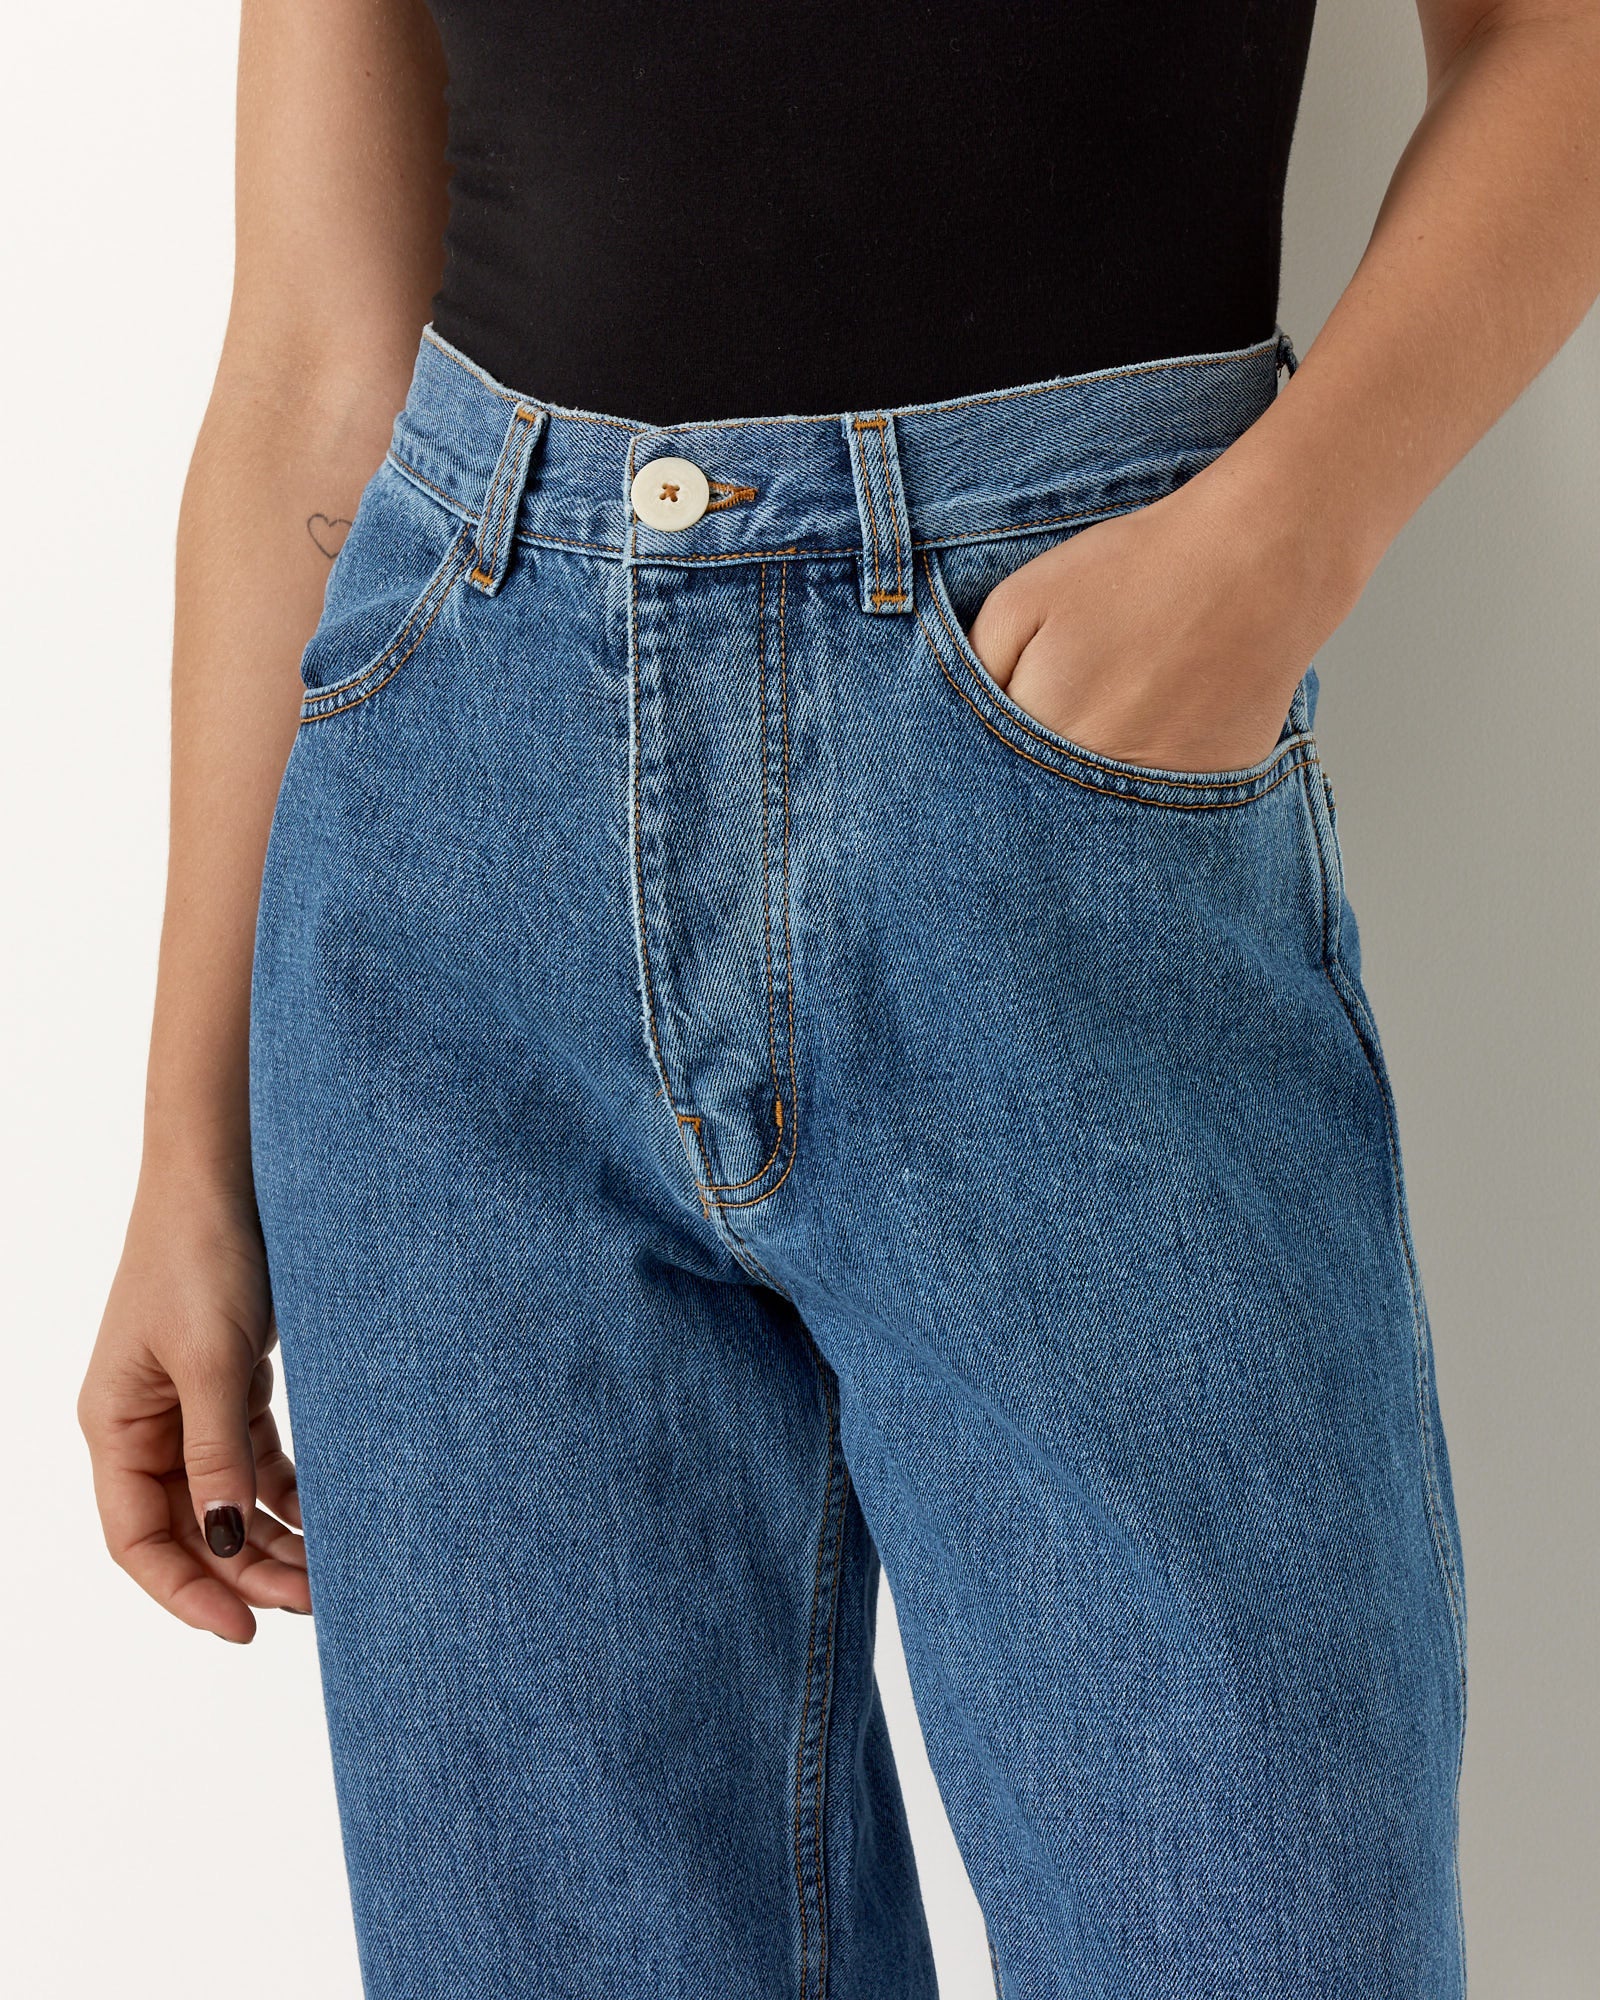 California Wide Pant in Cowboy Blue